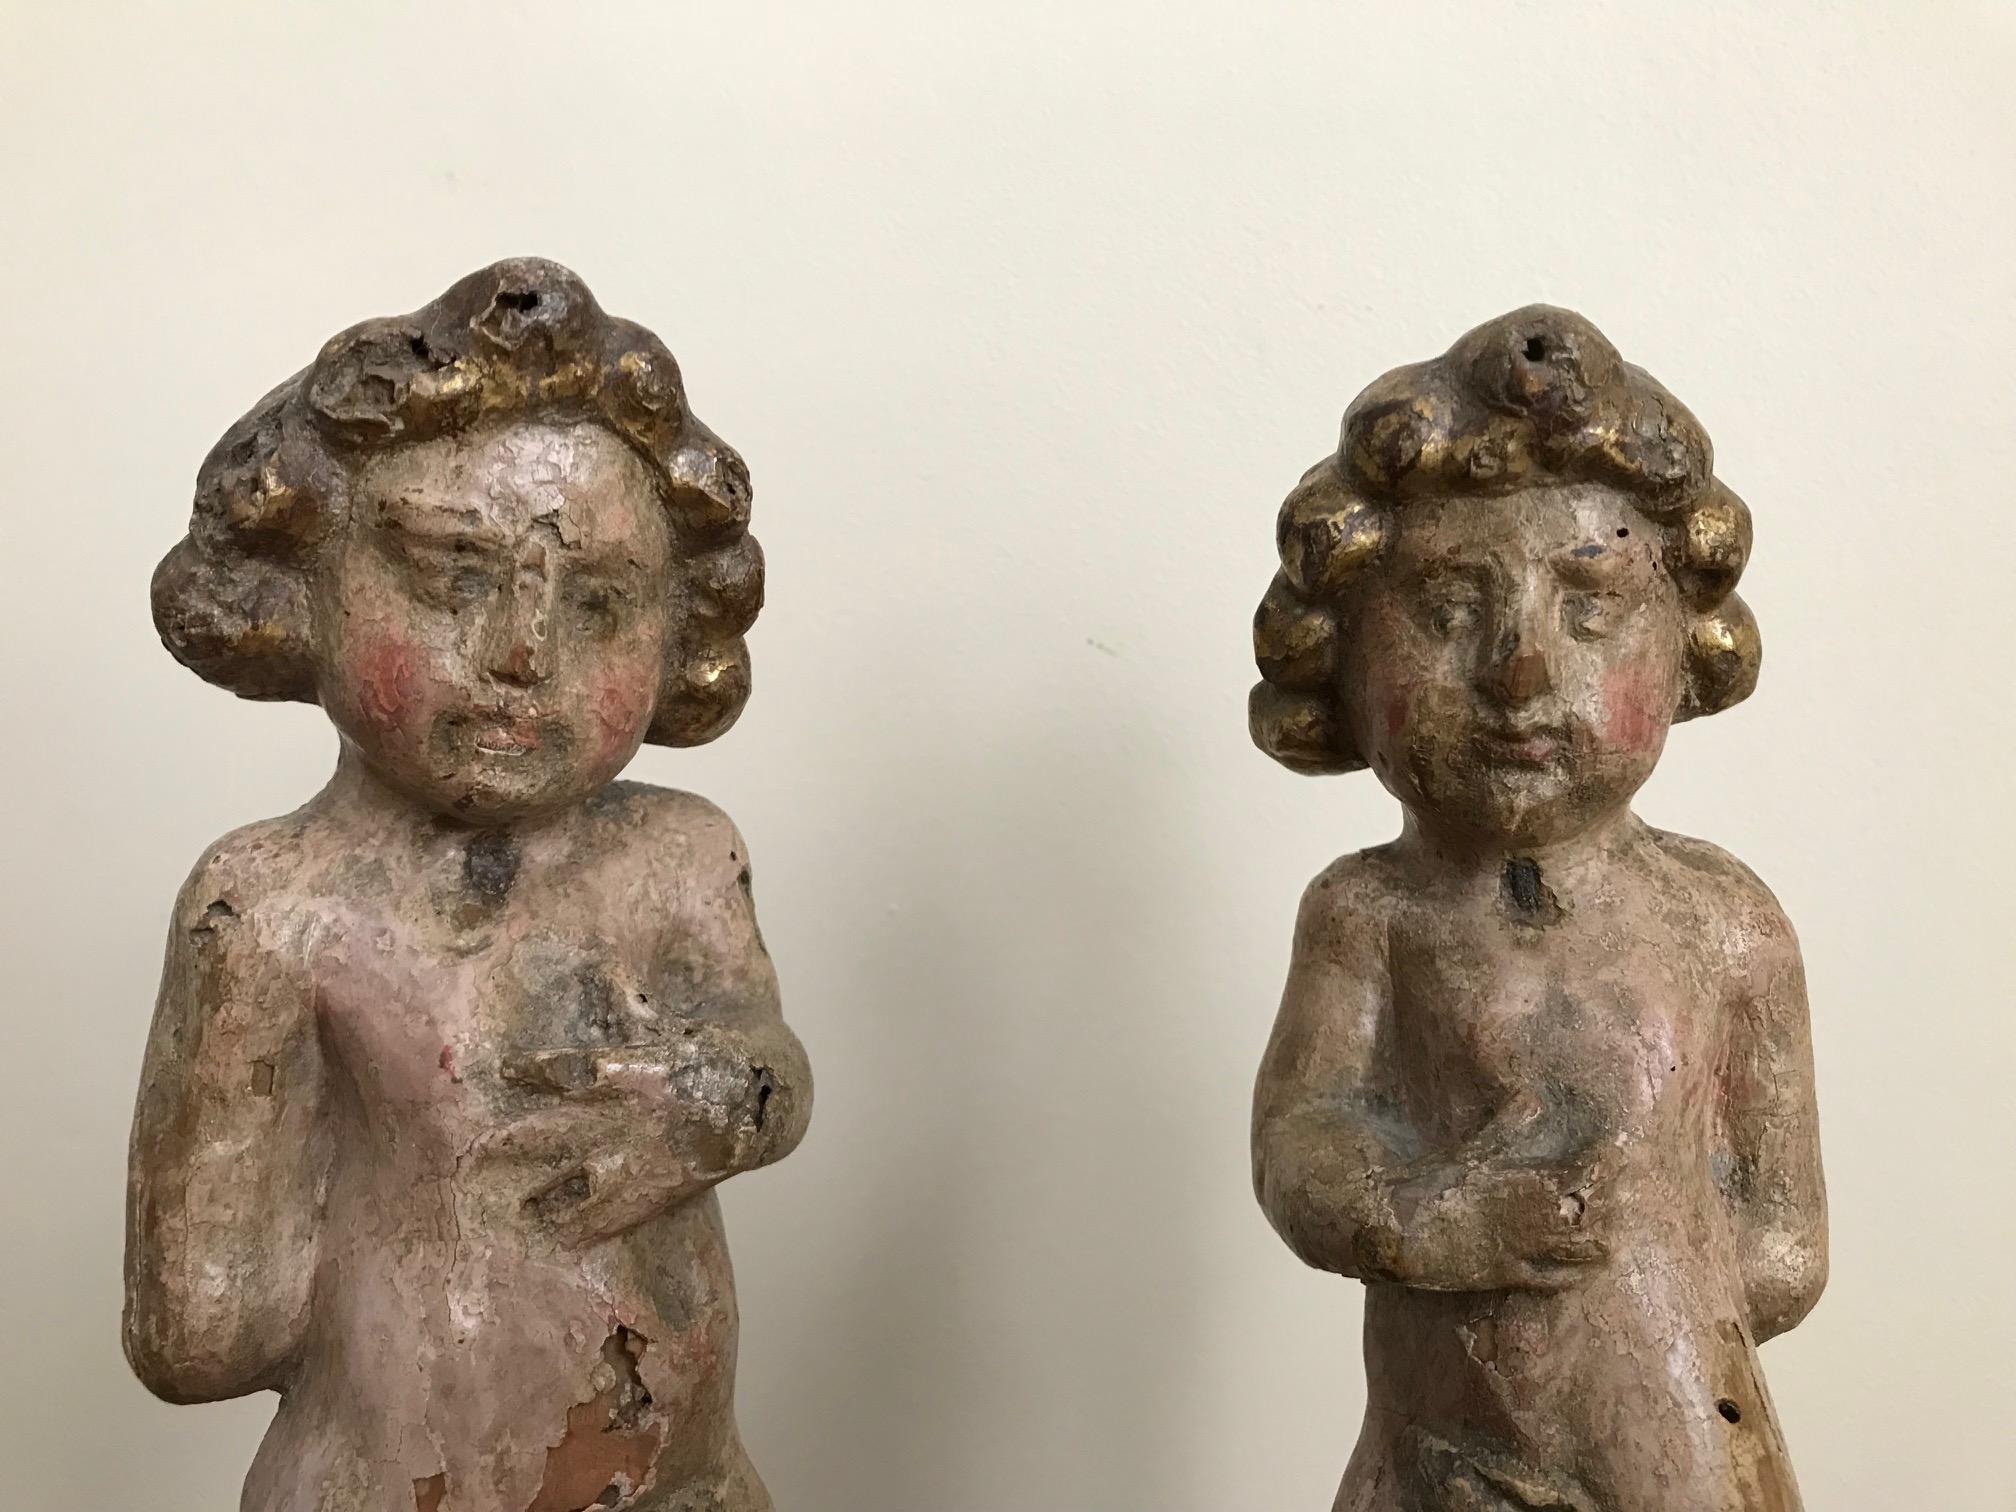 Wonderful pair of Italian Baroque carved putti with original polychrome (painted surface) and gilding. These two have quite a bit of personality, each with his individual expression. The stance is unusual with one arm behind the back and the other